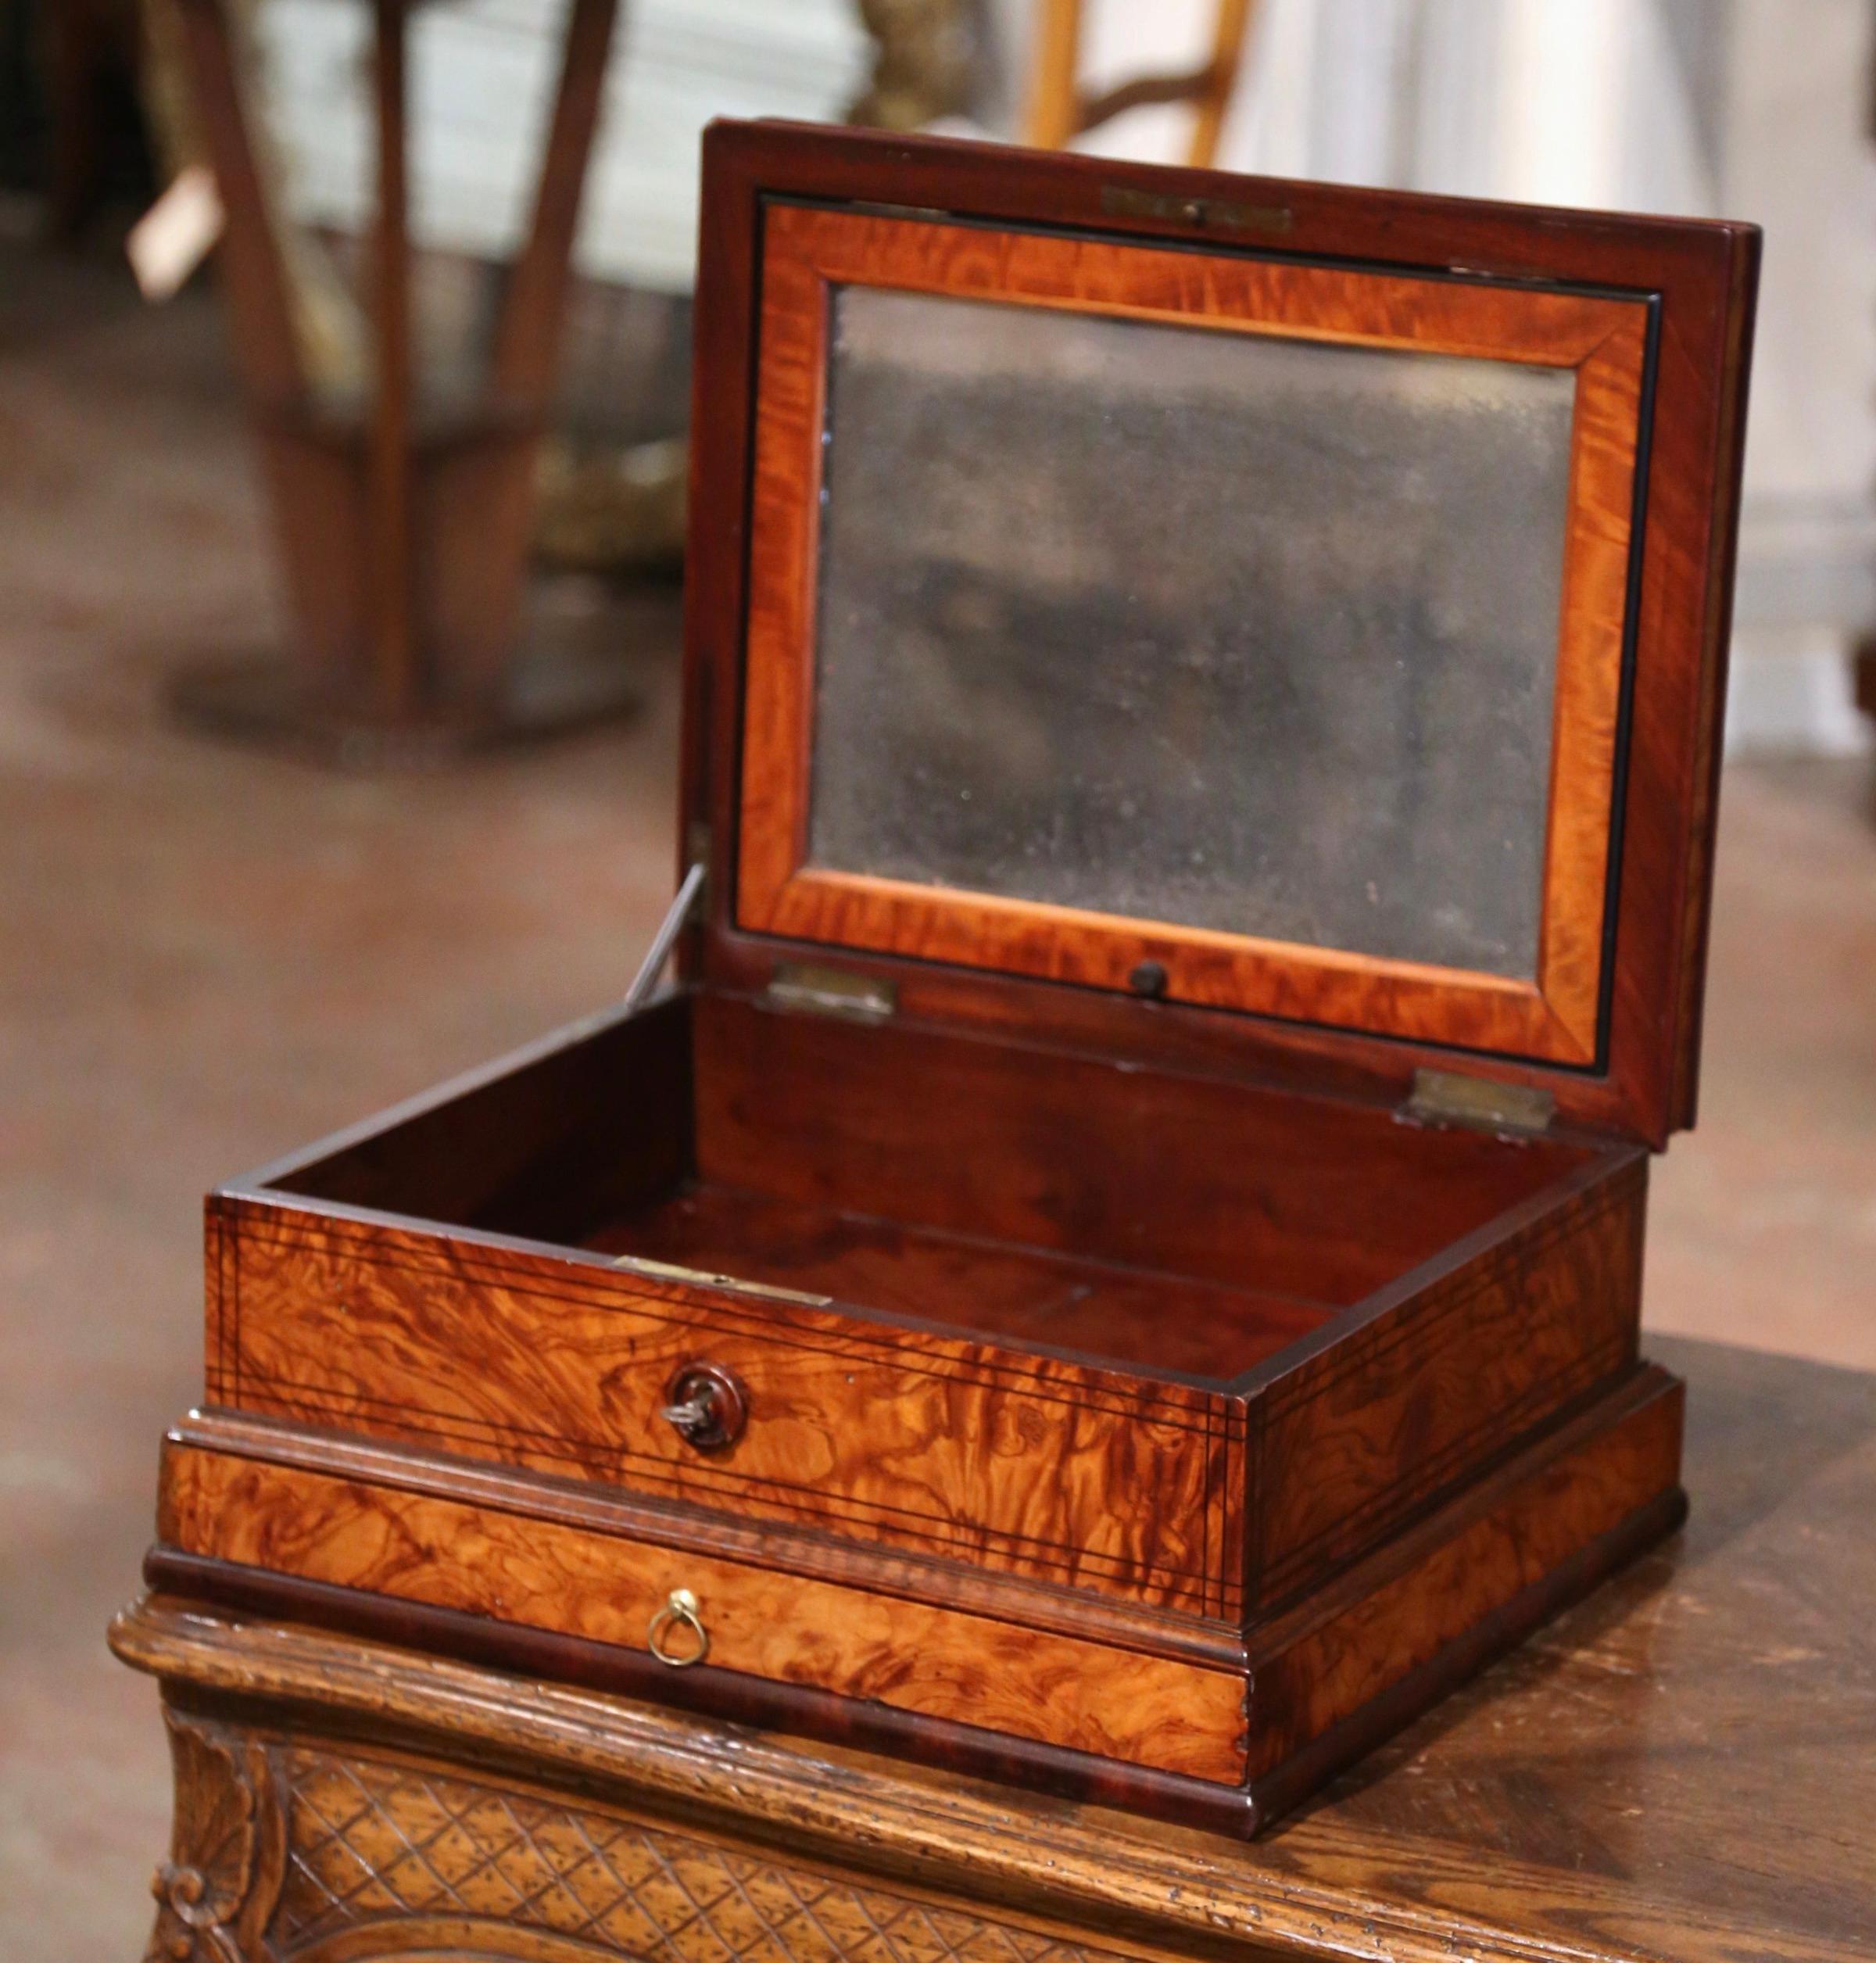 Decorate a coffee table or a shelf with this elegant antique box. Created in France circa 1880, the rectangular cabinet is decorated with an elegant floral inlaid star motif on the top. Opening the box, it reveals a large inside storage and a